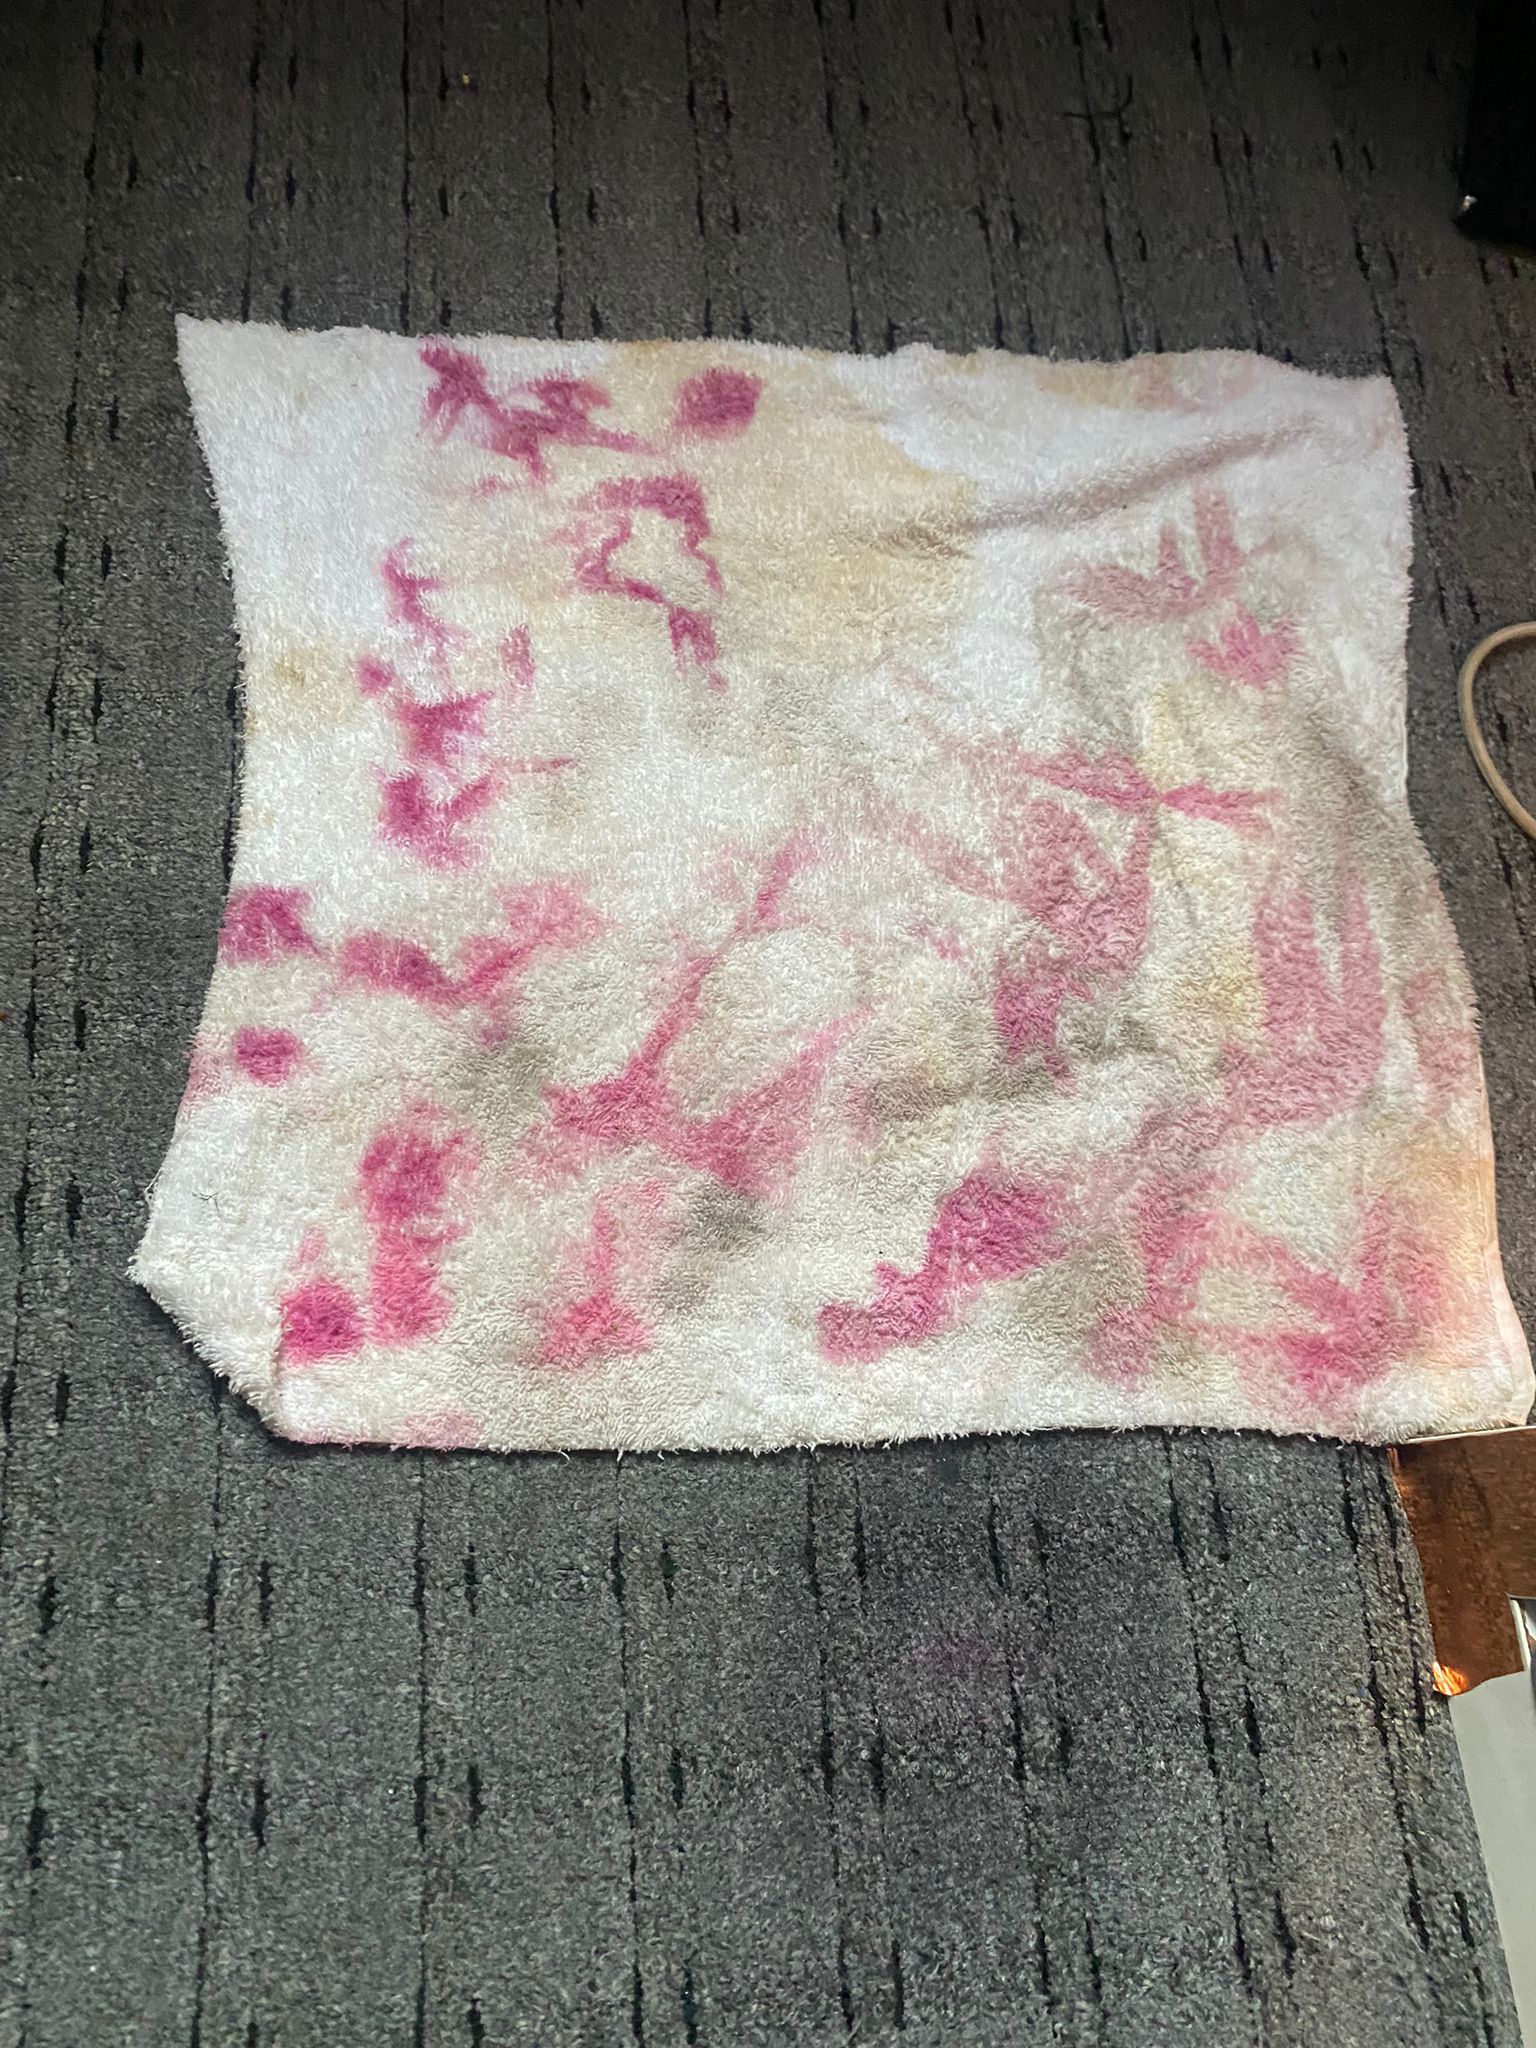 Cloth with pink stains